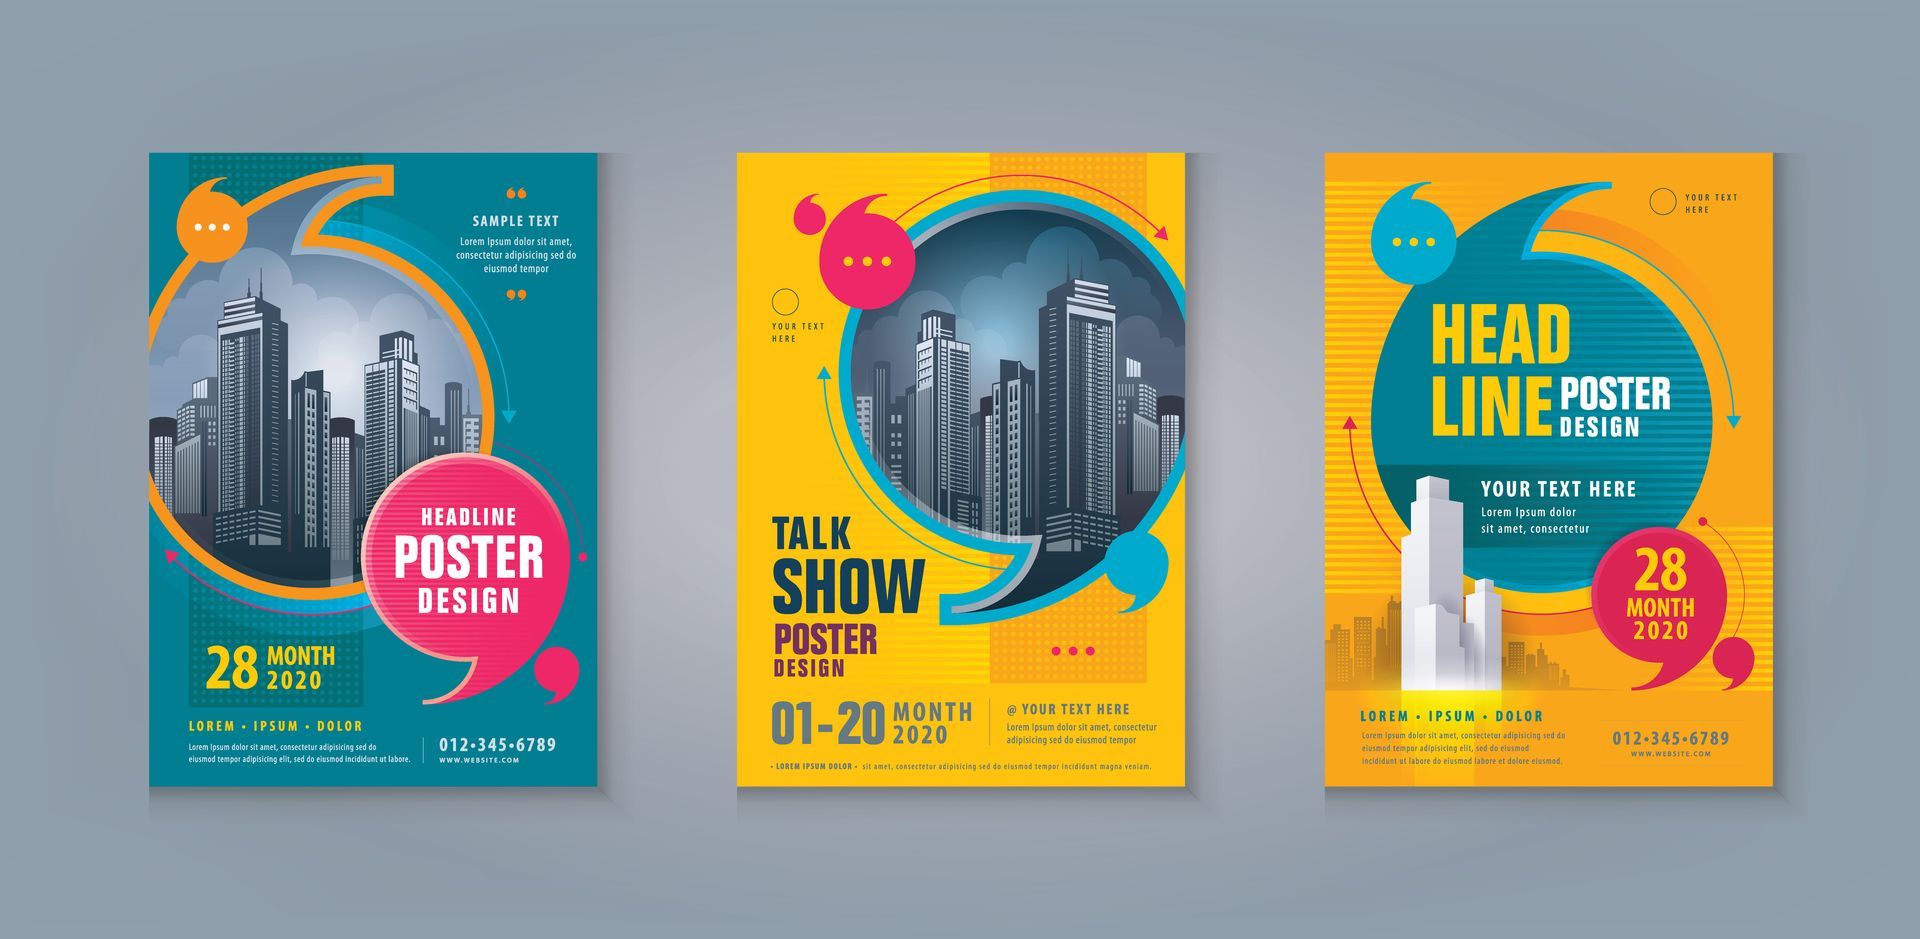 Central Phoenix Custom Posters For Conferences & Trade Shows